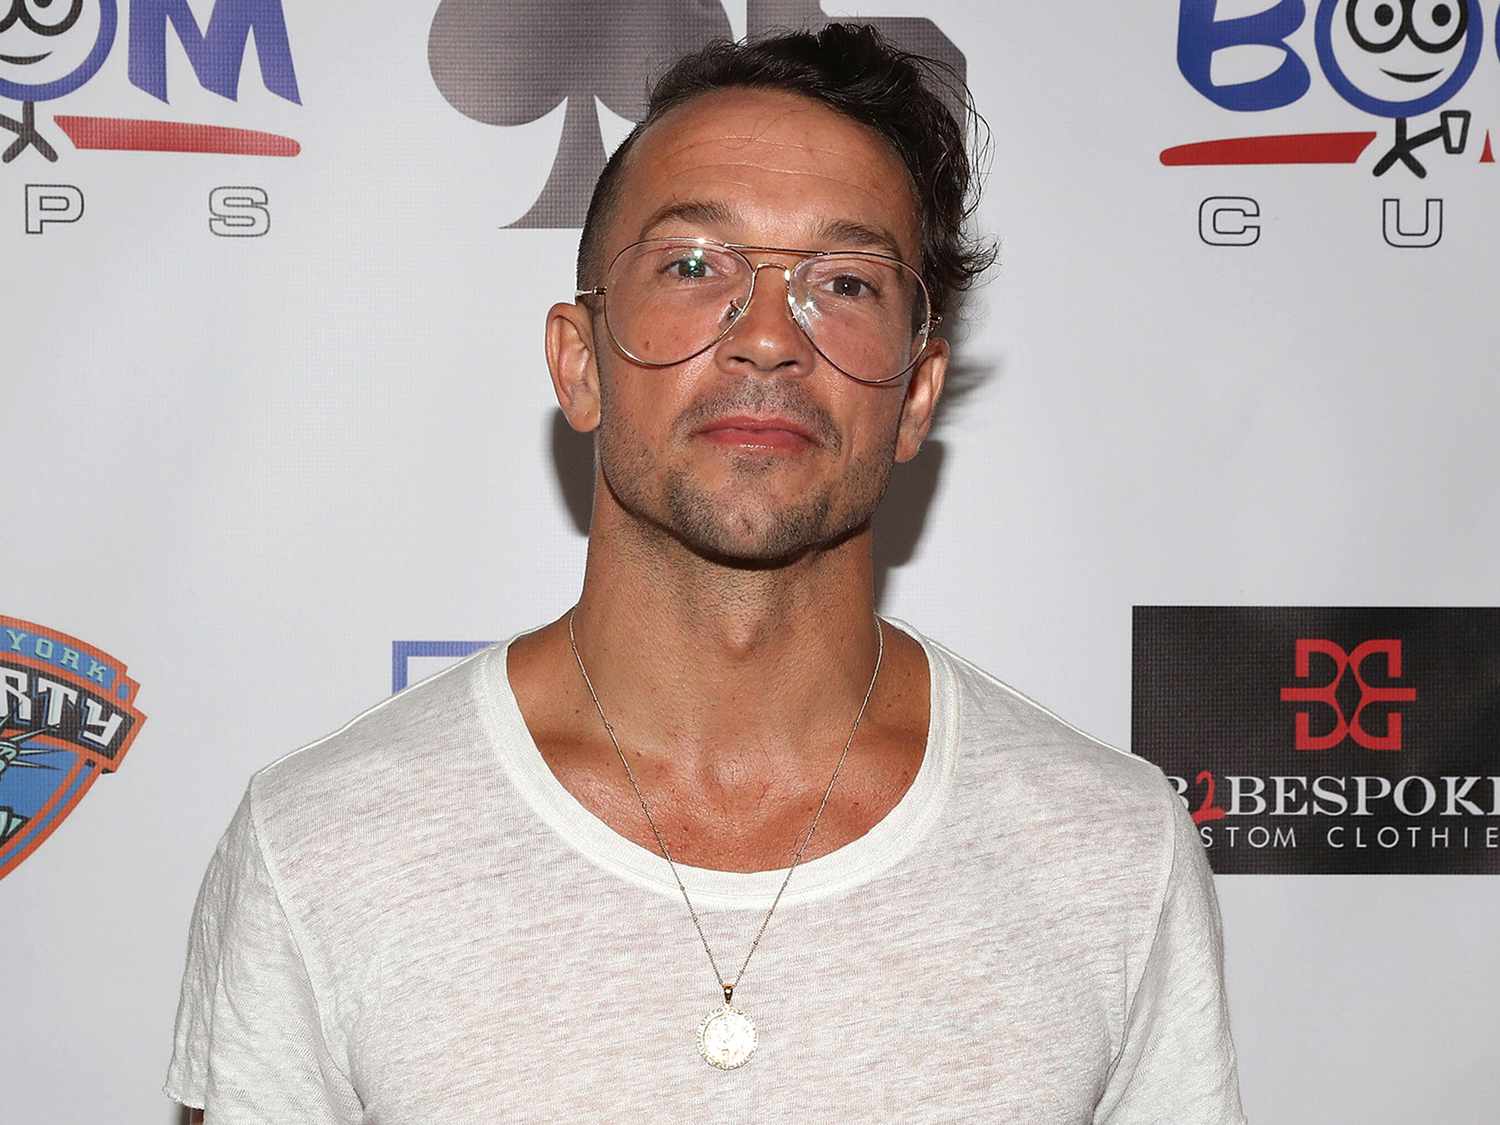 Carl Lentz on 'Healing' from Cheating Scandal, Anniversary with Wife